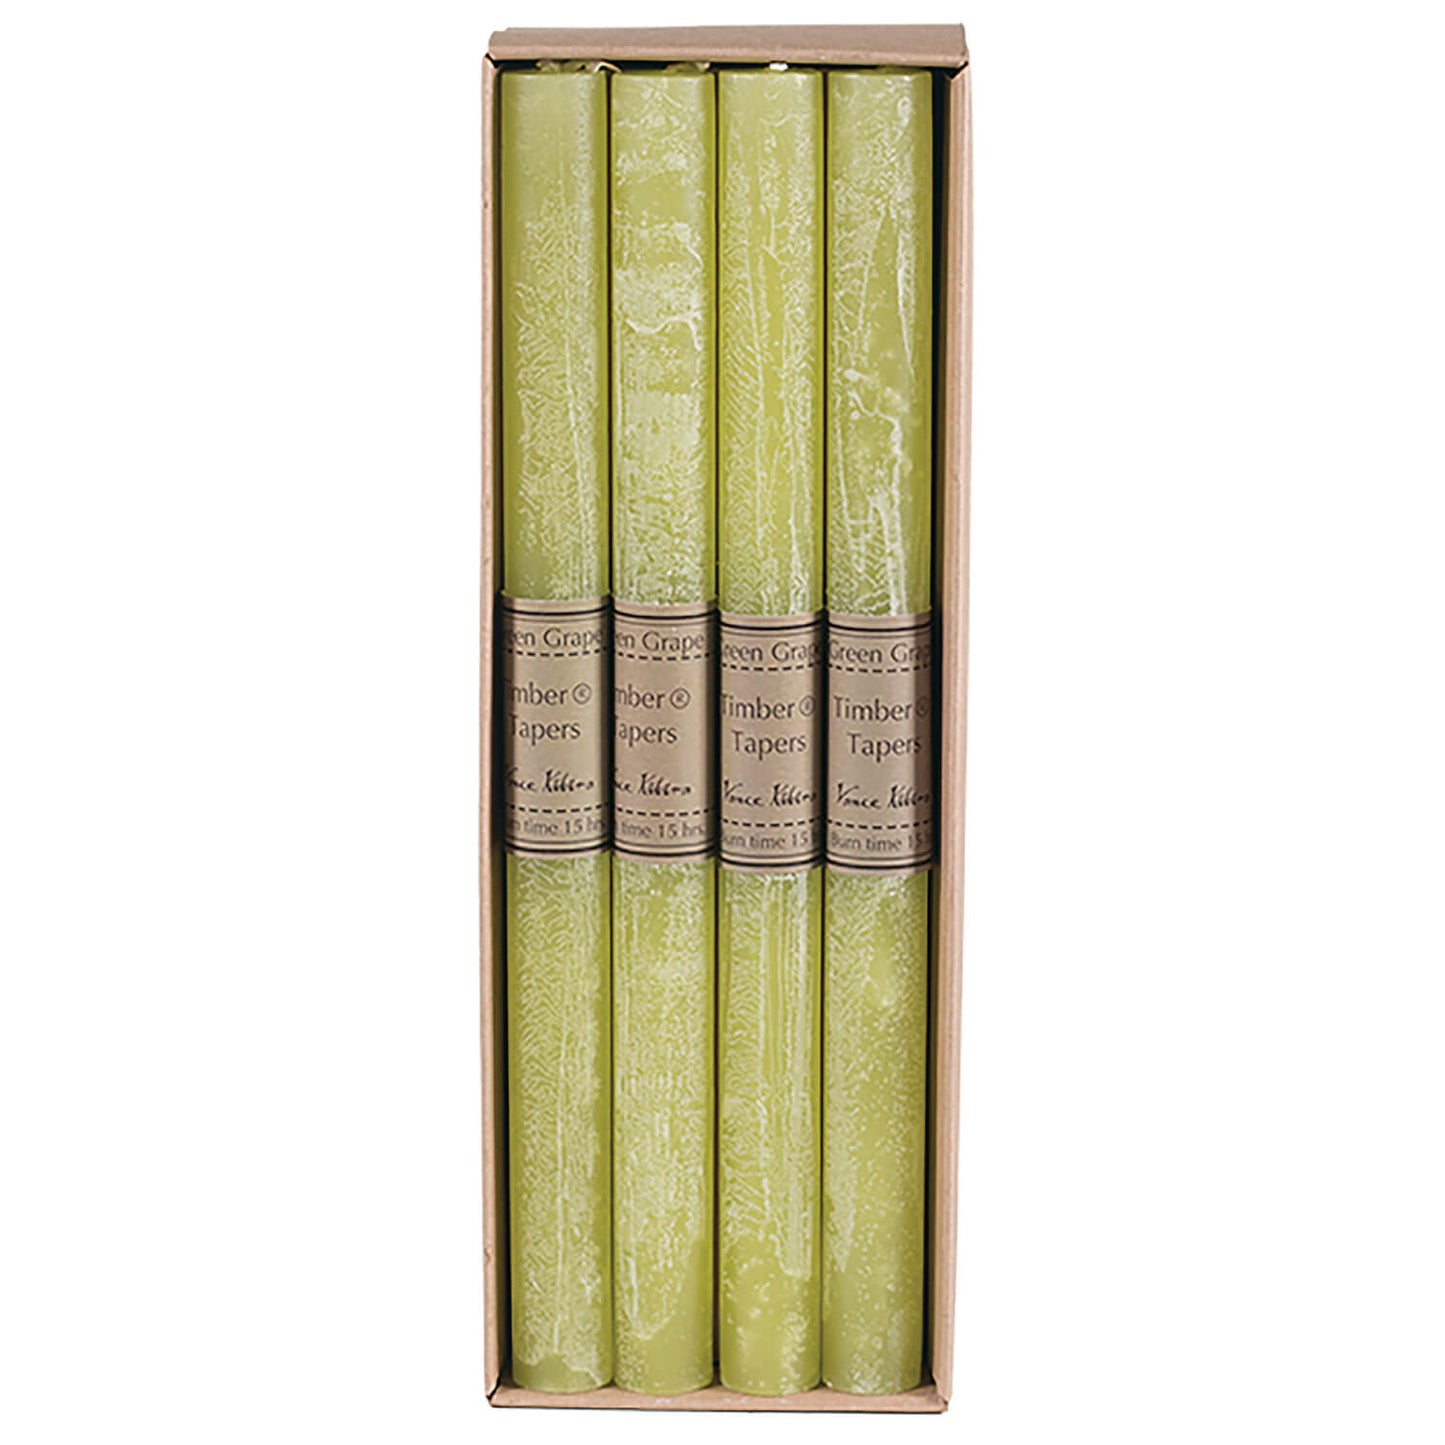 Green Grape Timber Taper Candles